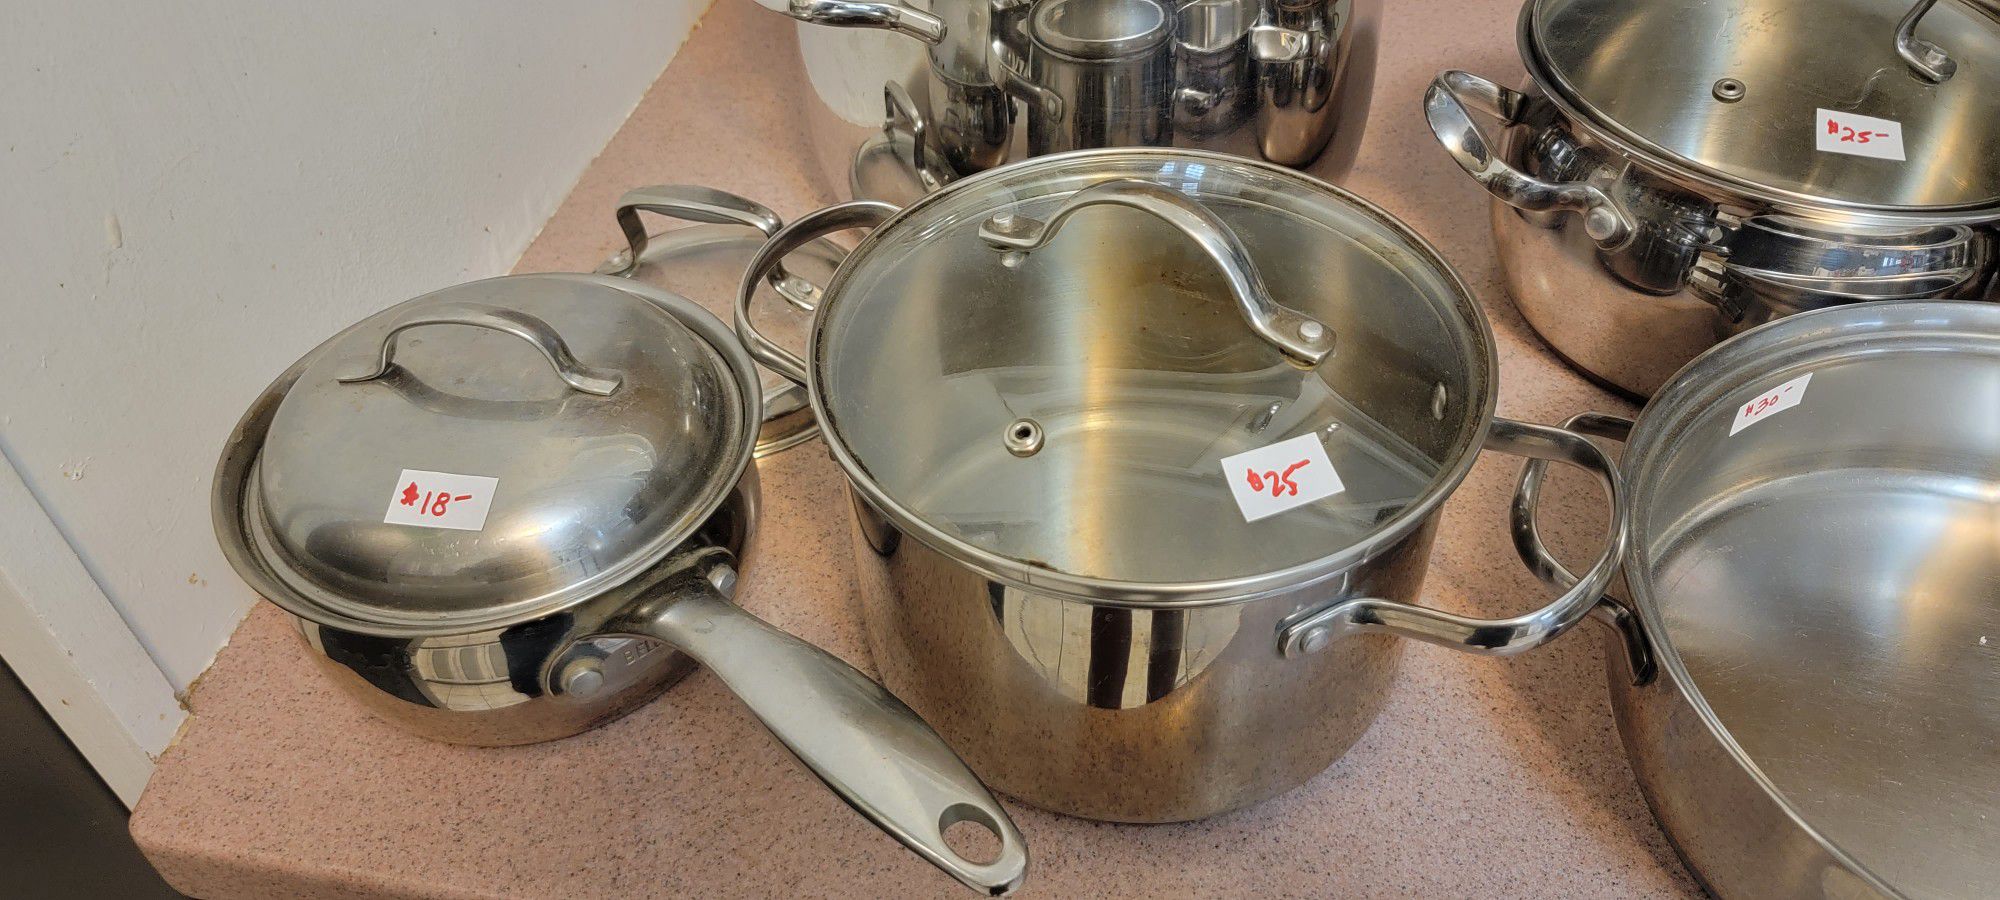 Spectacular savings on stainless steel cookware from Belgique and more, Up  to 75% off